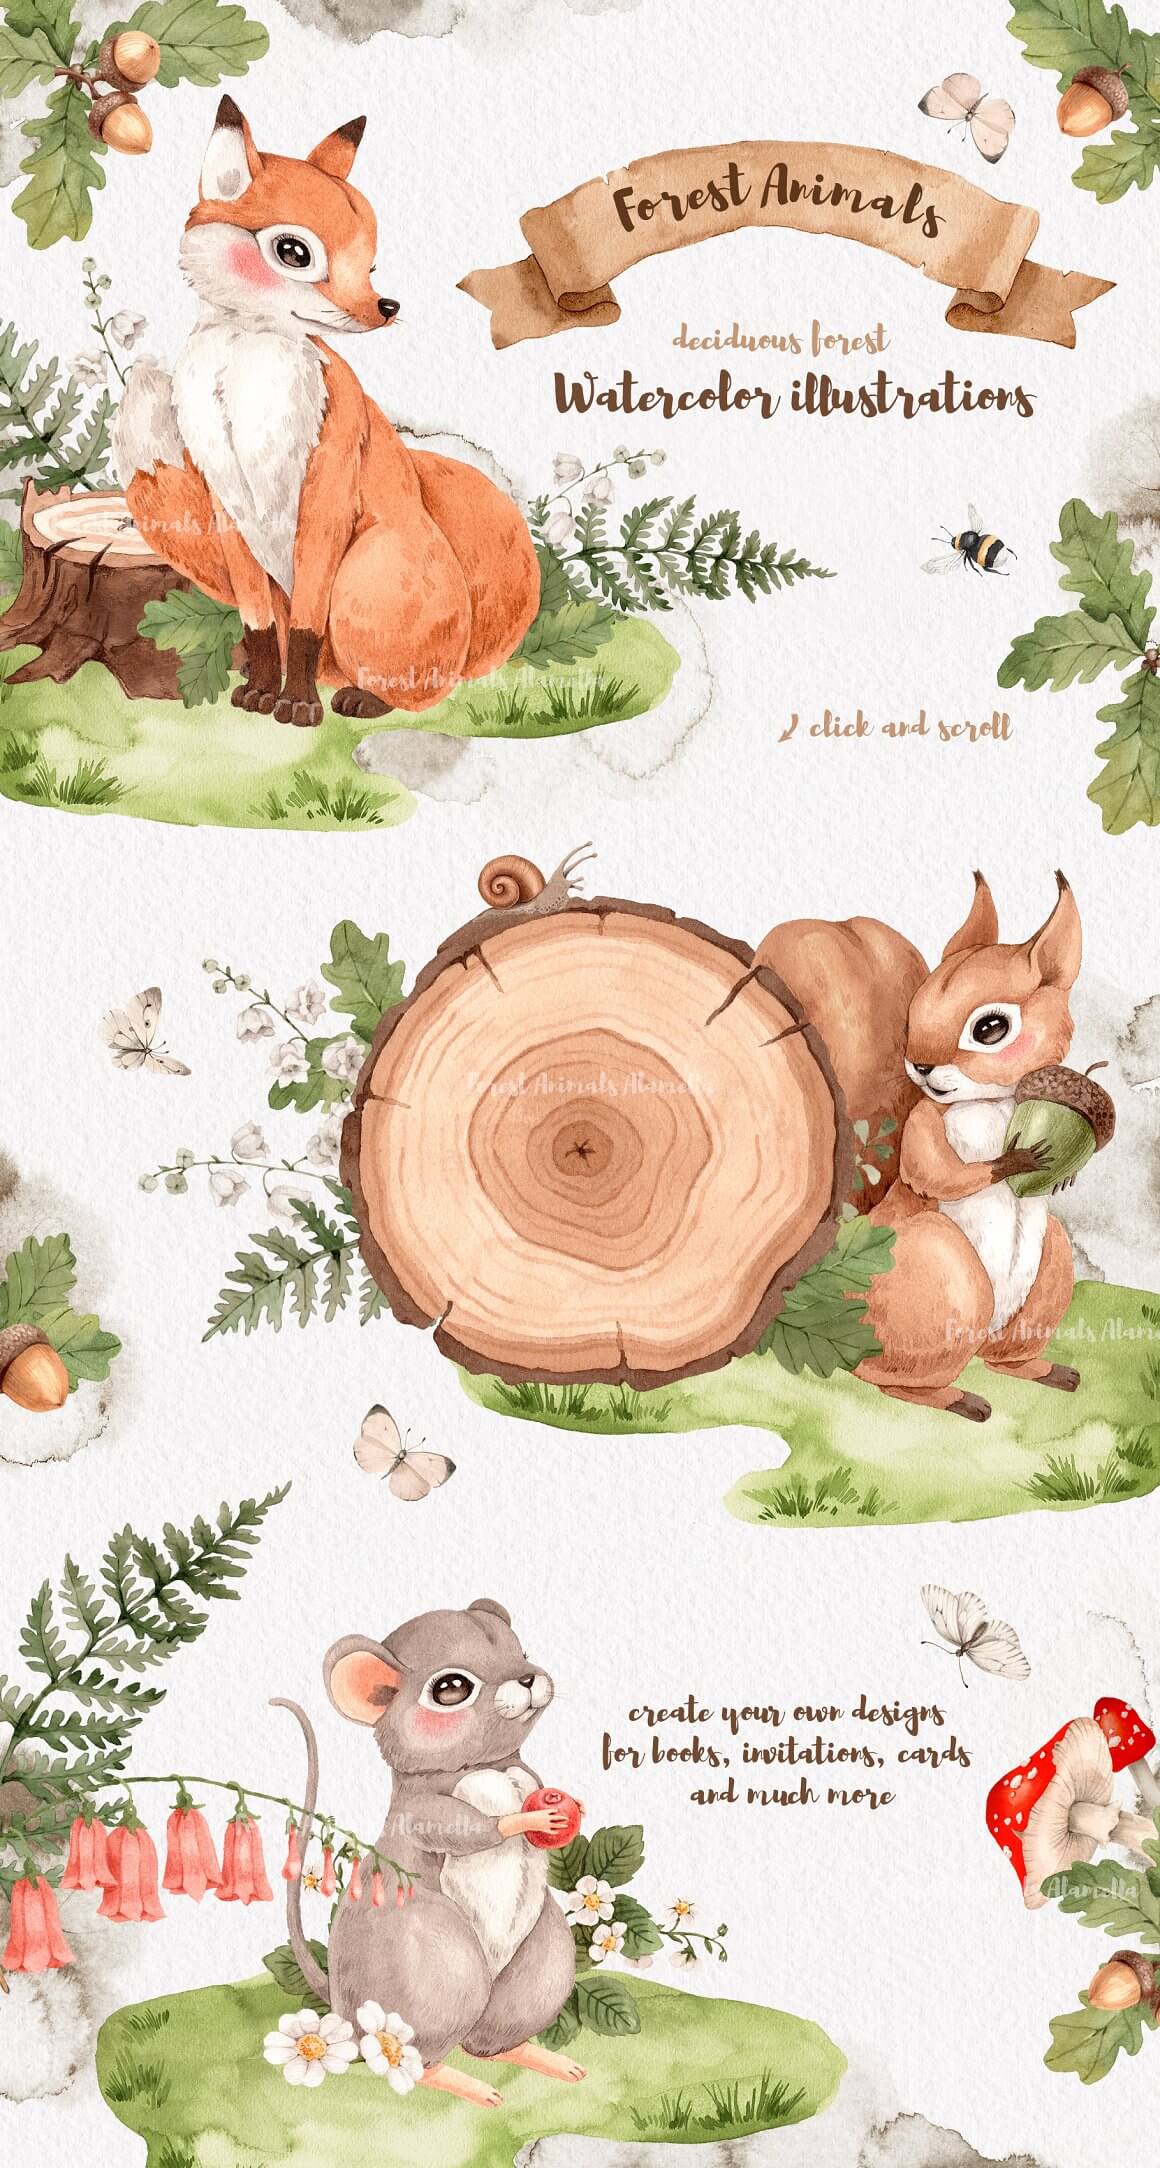 Watercolor drawing of forest animals: a fox in a clearing, a squirrel near a stump, a bear on the lawn.